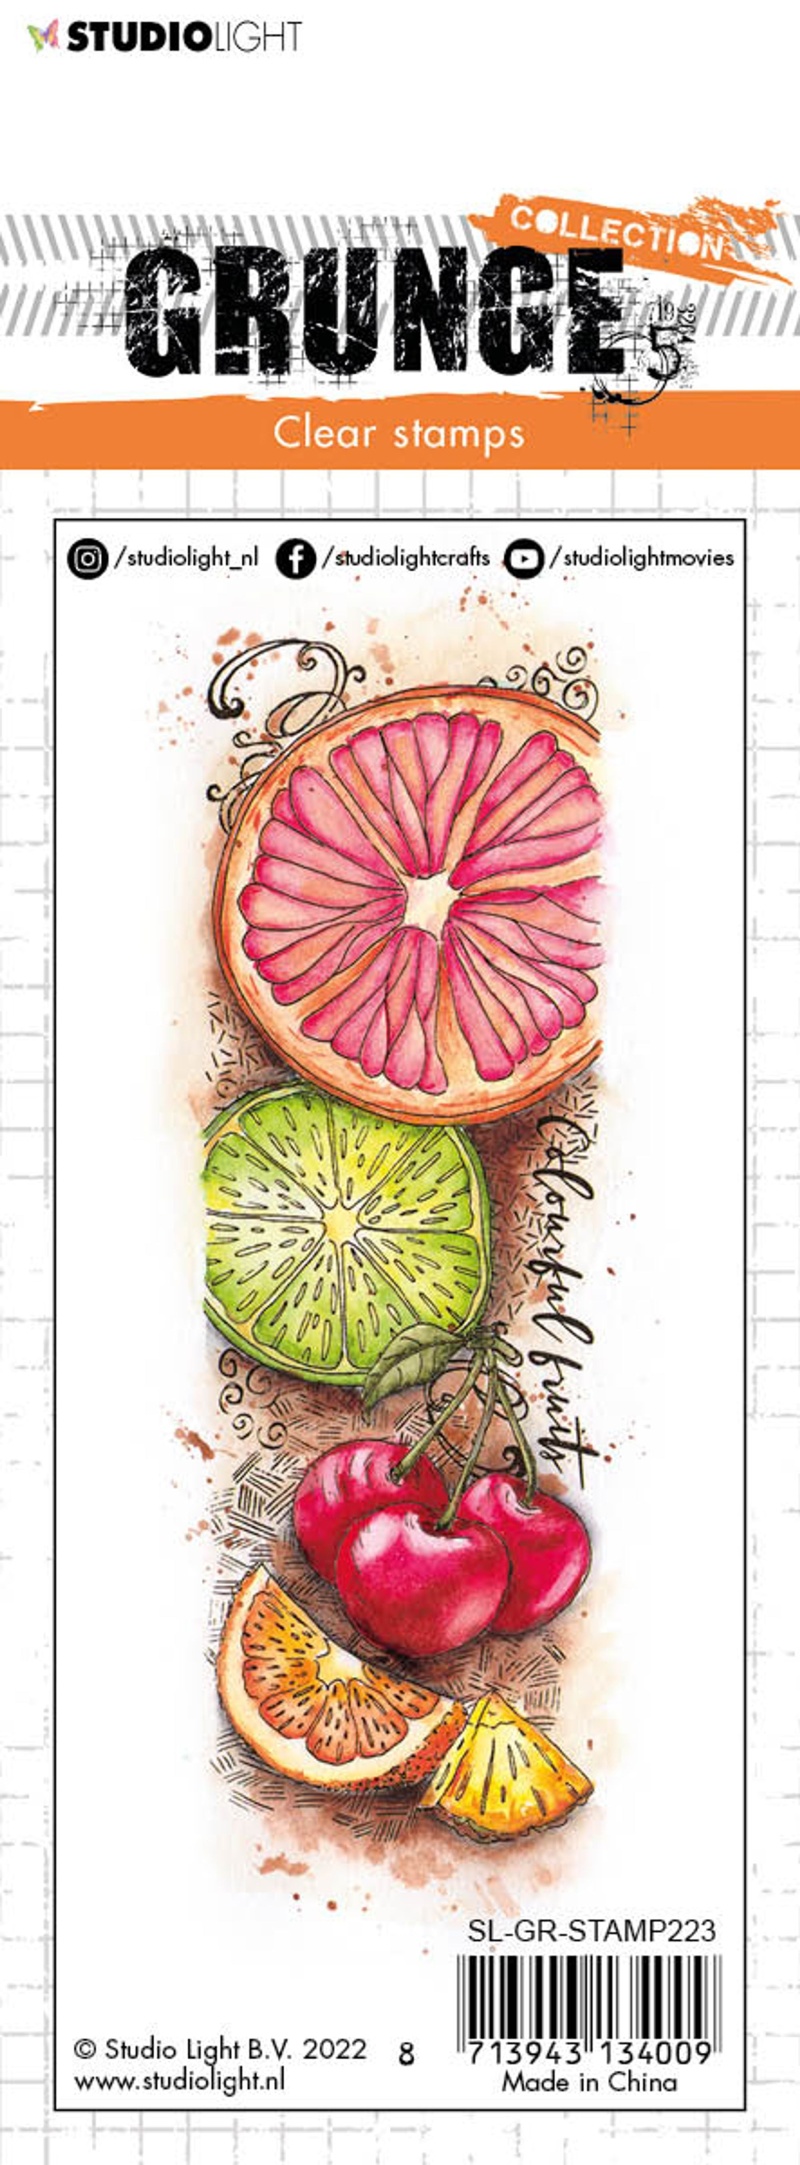 Sl Clear Stamp Colourful Fruit Grunge Collection 148X52,2X3mm 1 Pc Nr.223